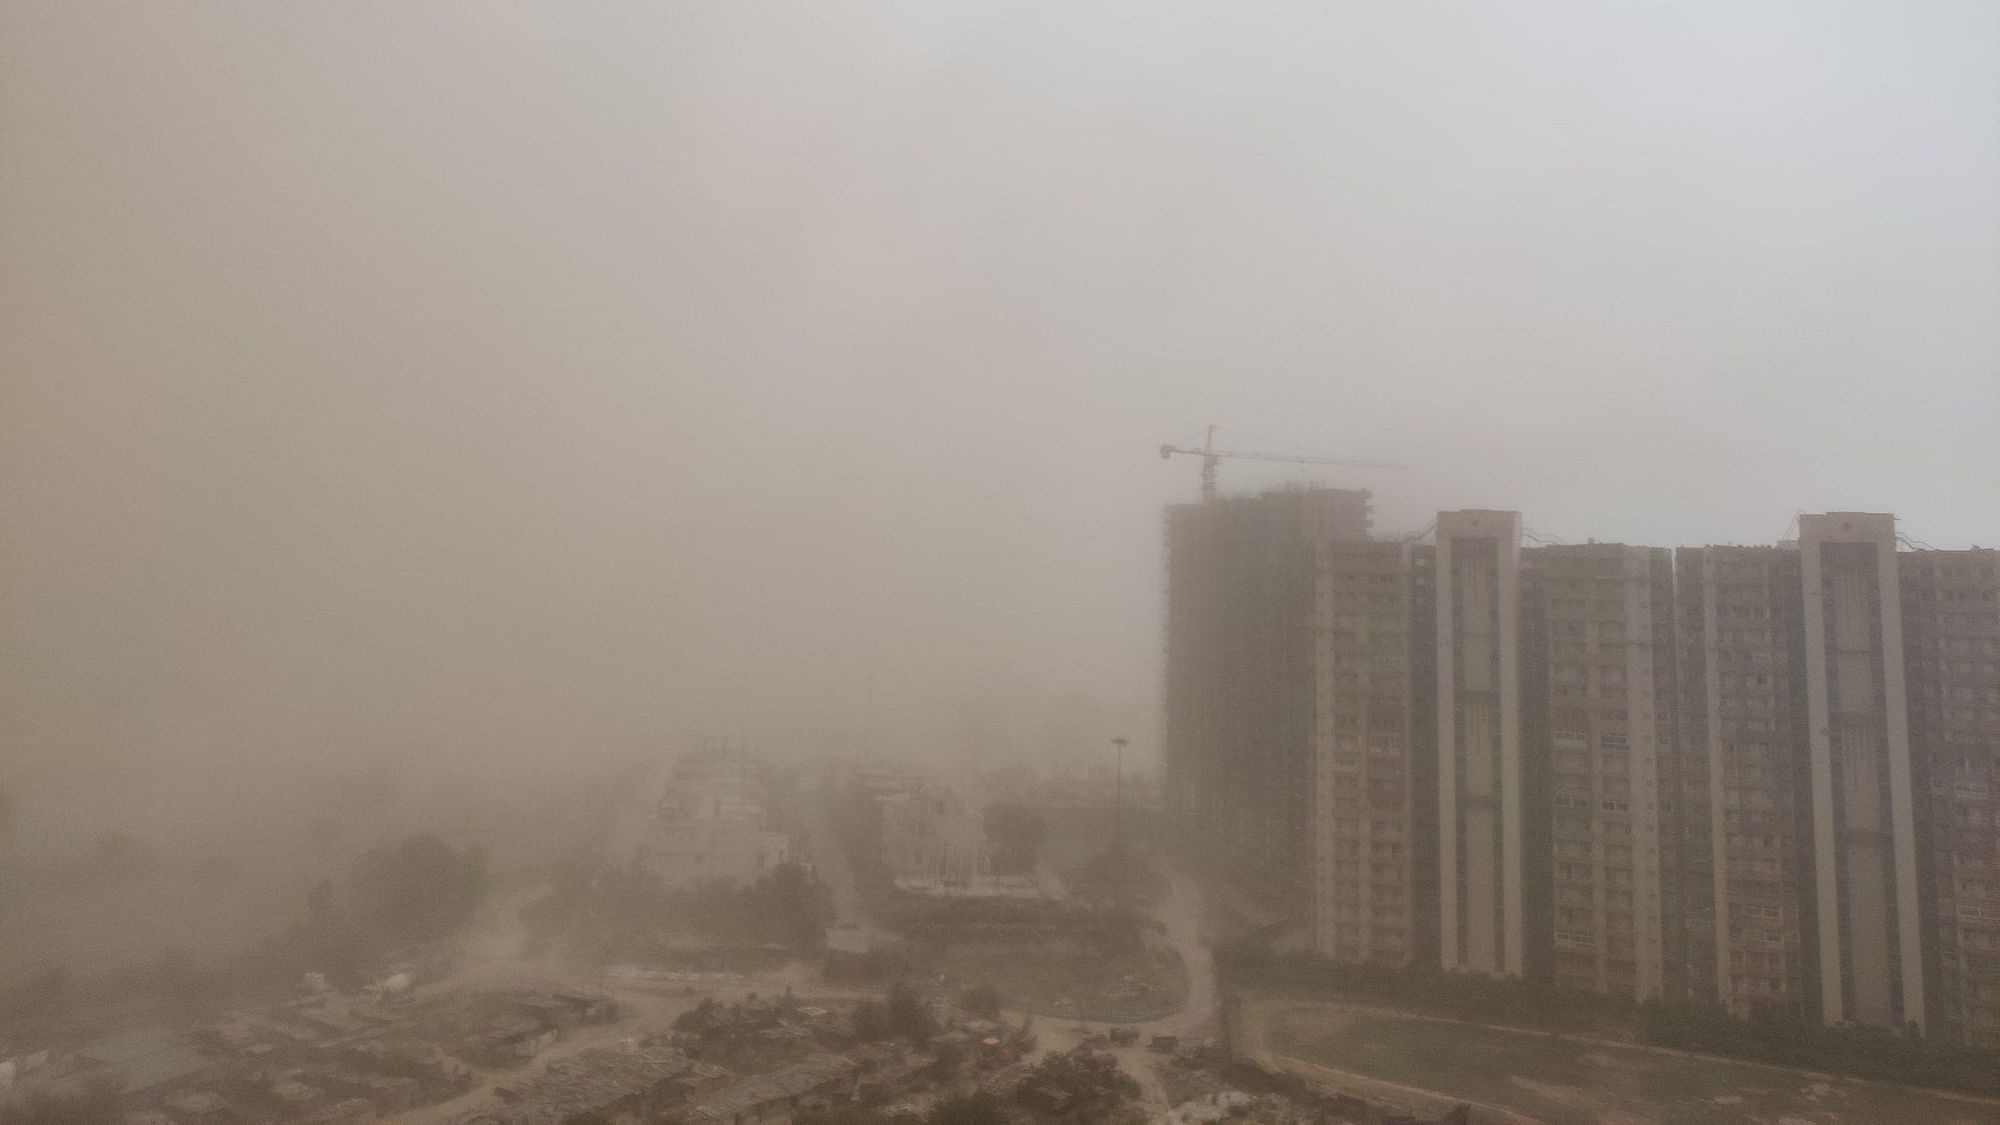 A sudden change in weather brought the temperatures down in Delhi-NCR, as dust storms and rain engulfed the city on Sunday, 10 May.